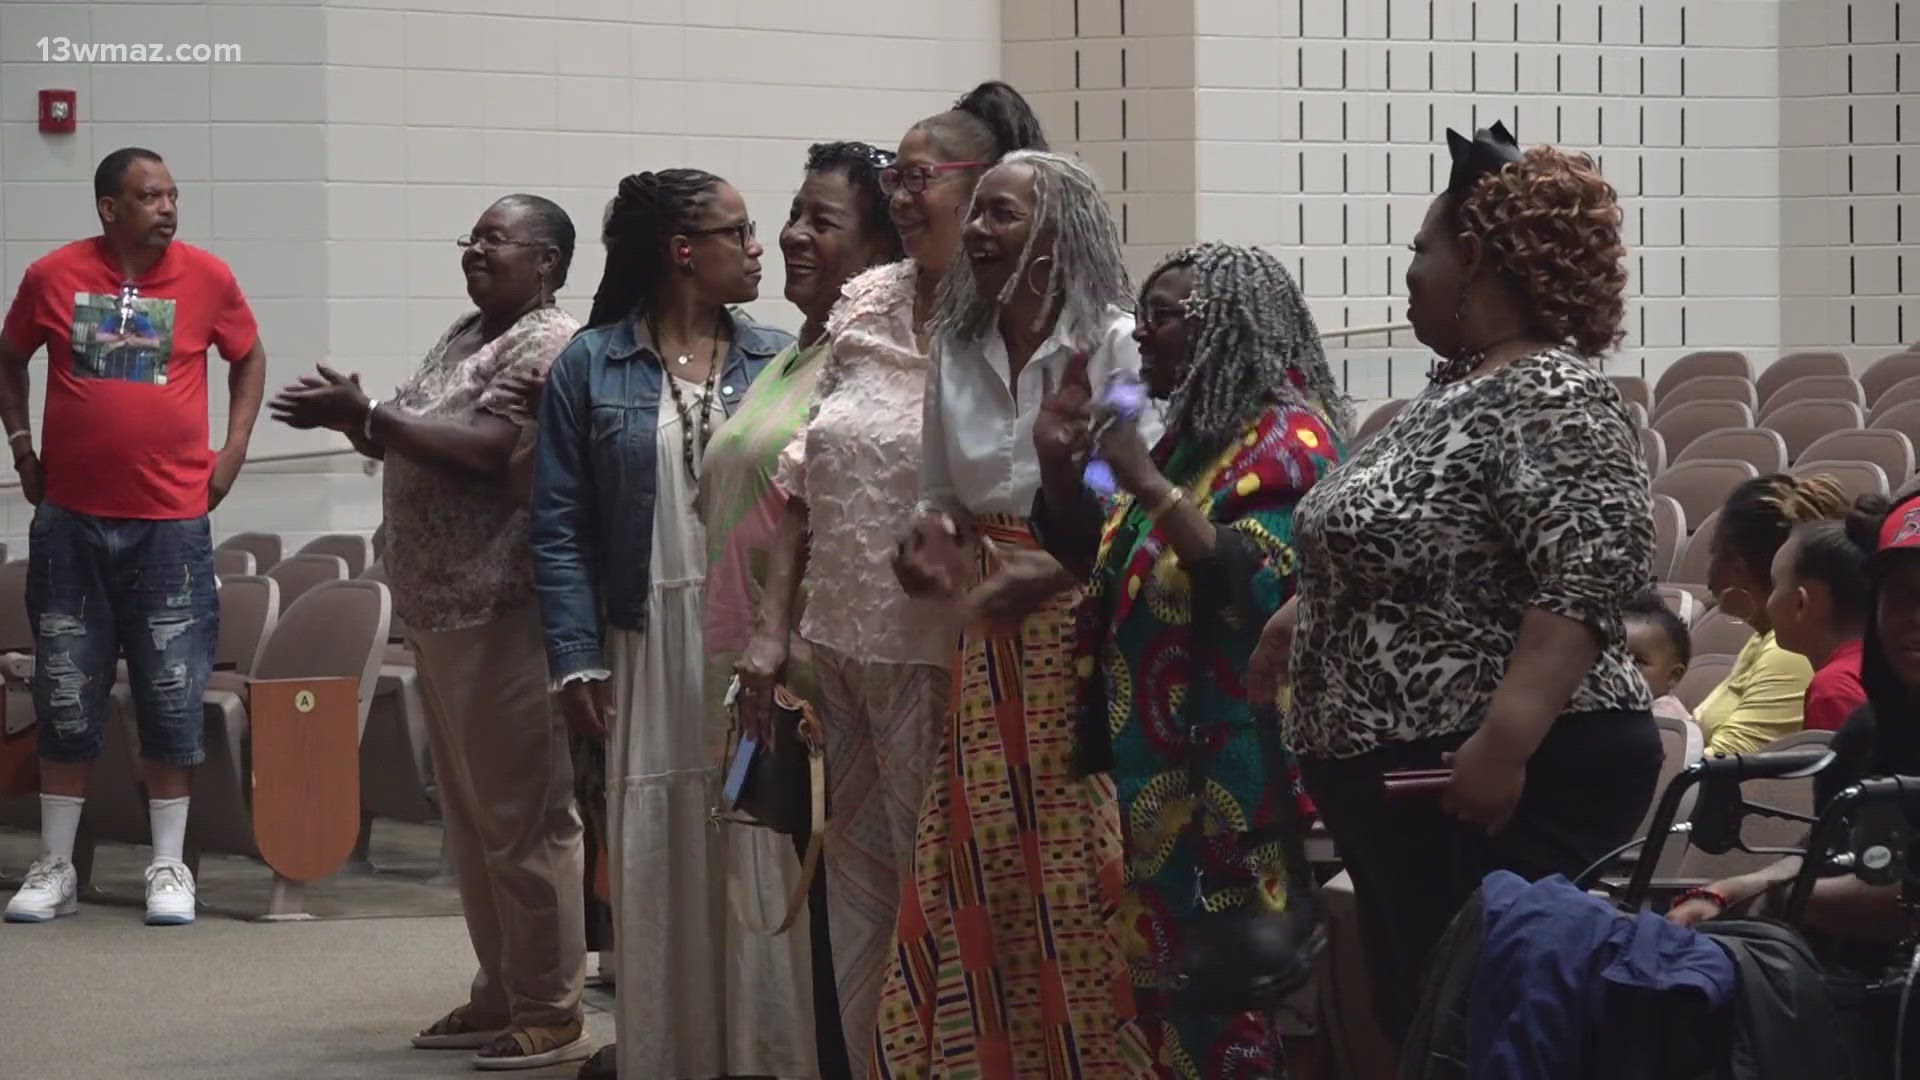 Take a look at how Dublin is honoring integration during their Juneteenth festivities.